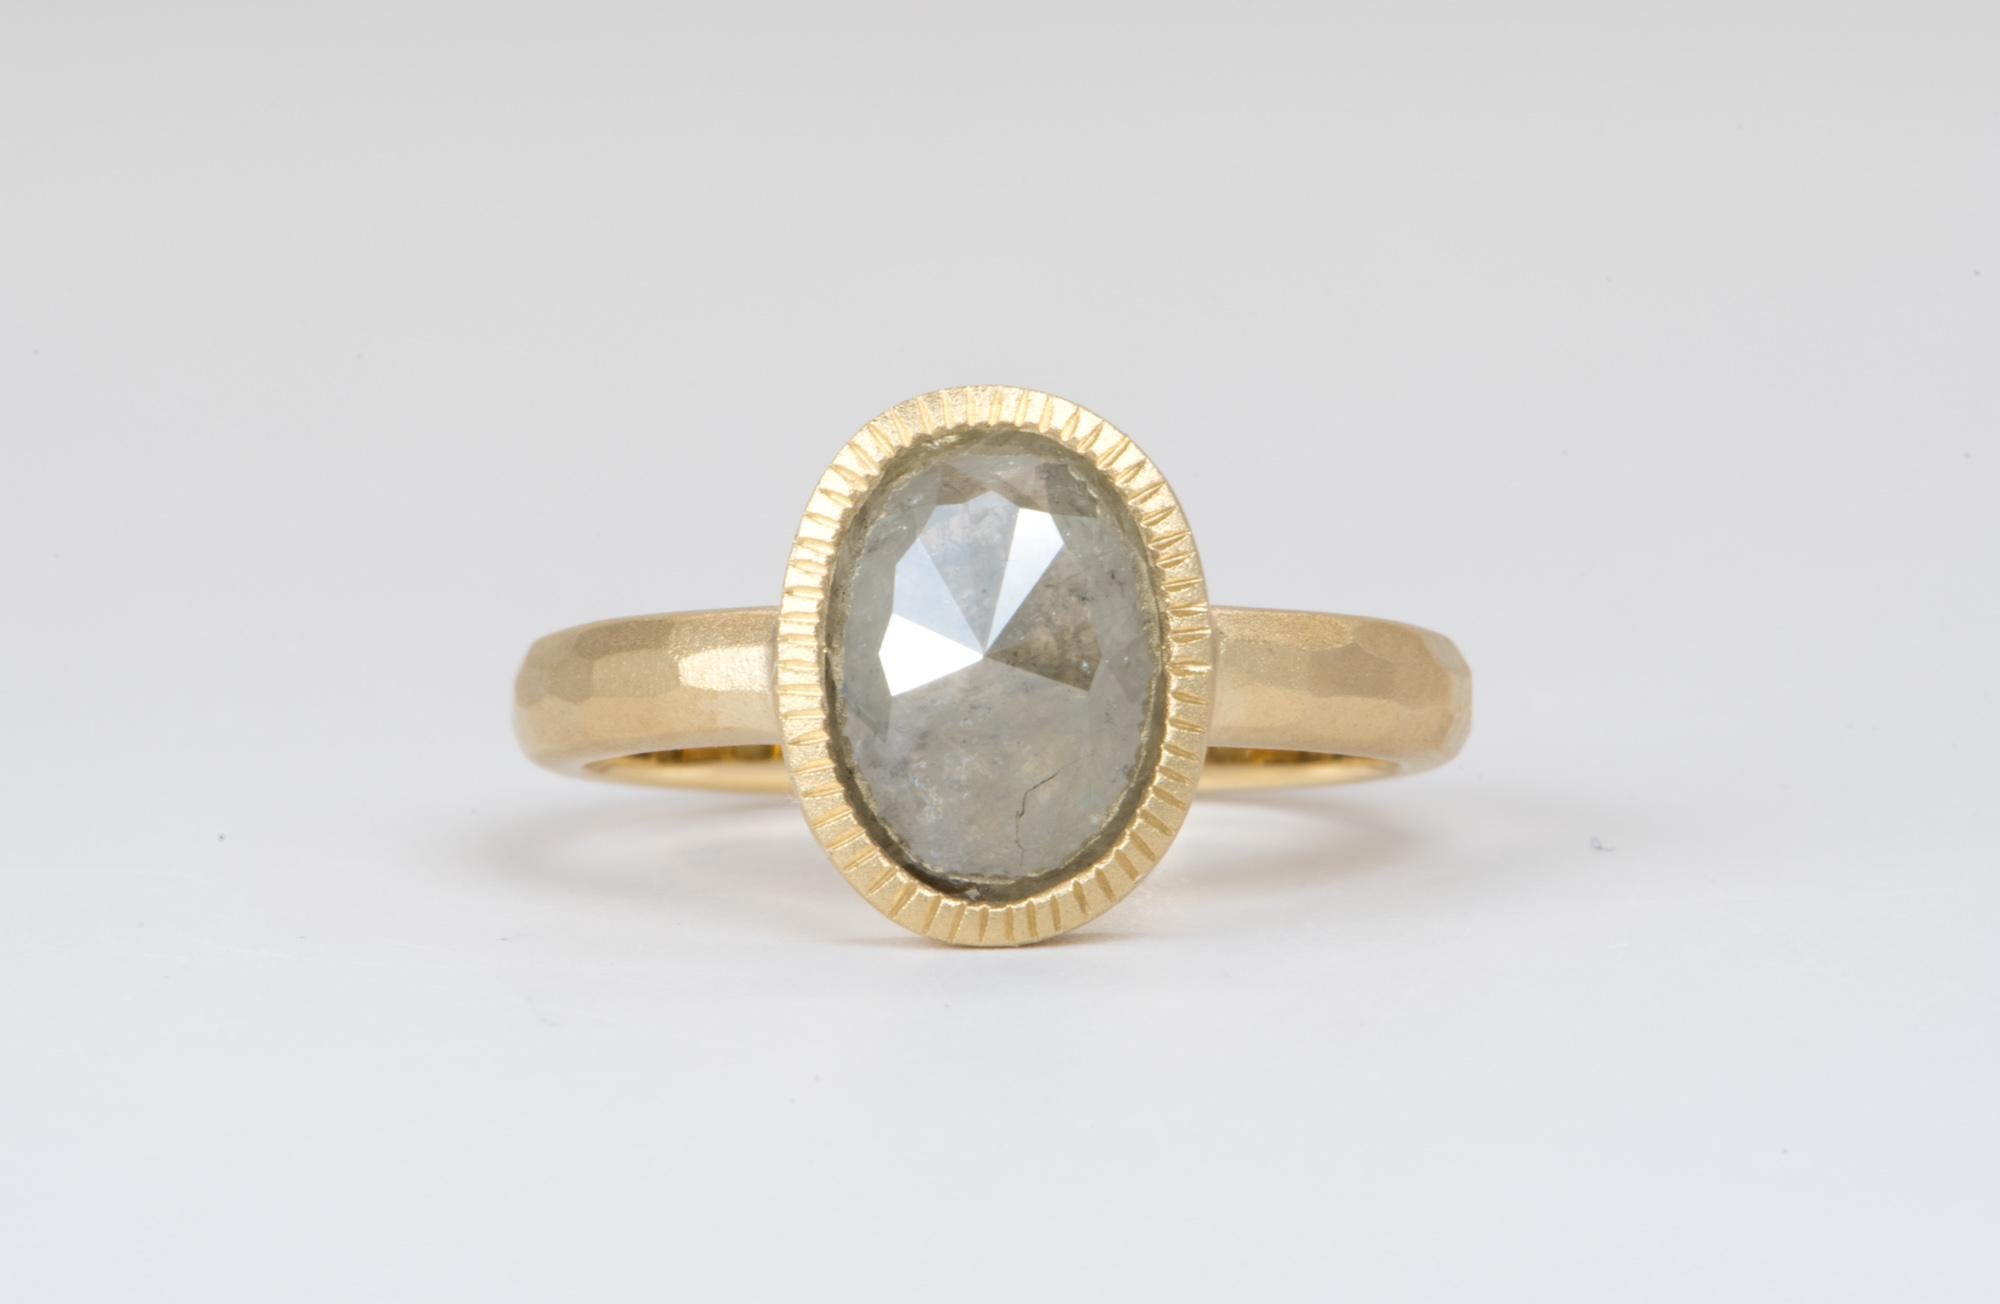 ♥  Solid 14K yellow gold ring set with an oval-shaped salt and pepper diamond in the center, bezel set with a hammered matte finish
♥  The overall setting measures 9.3mm in width, 11.8mm in length, and sits 4.4mm tall from the finger

♥  US Size